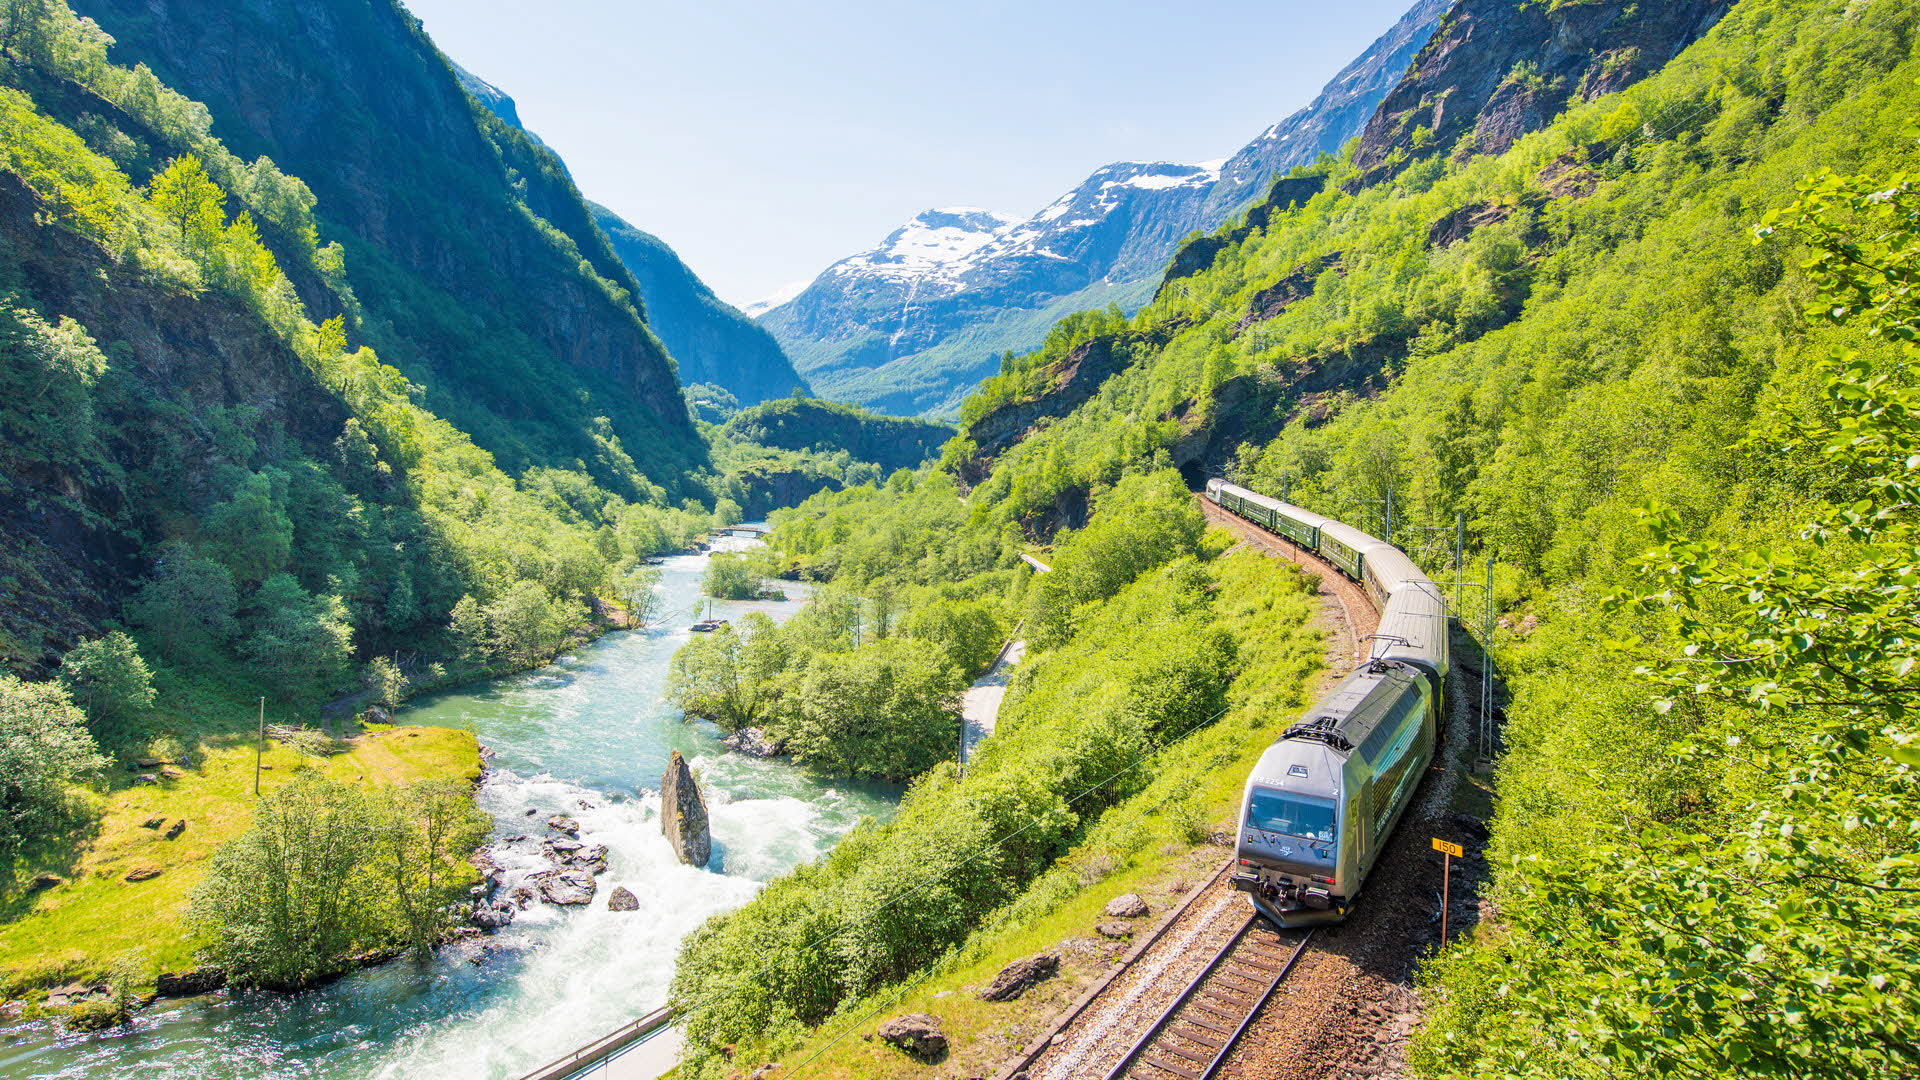 The Flåm Railway passing through the fertile Flåmsdalen Valley next to the rushing river on a sunny day, white mountain peaks in the background